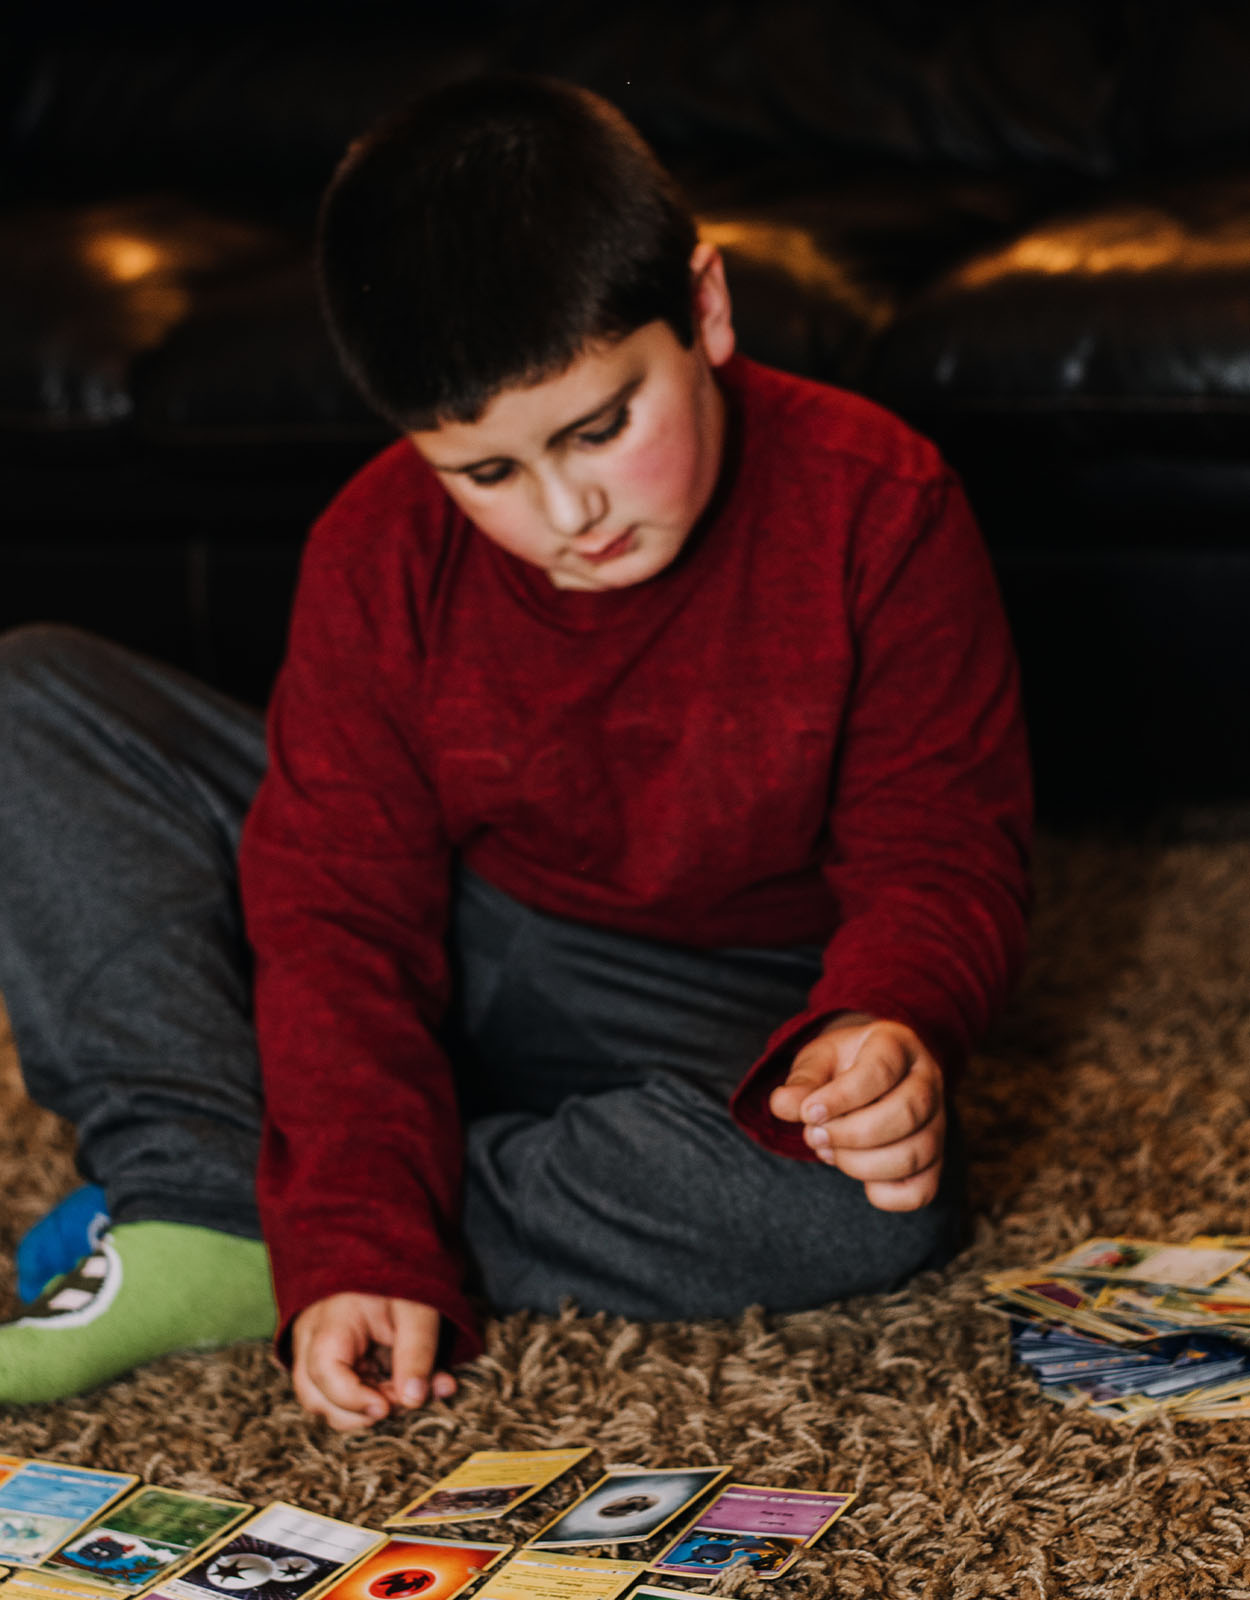 A child playing with his Pokemon cards